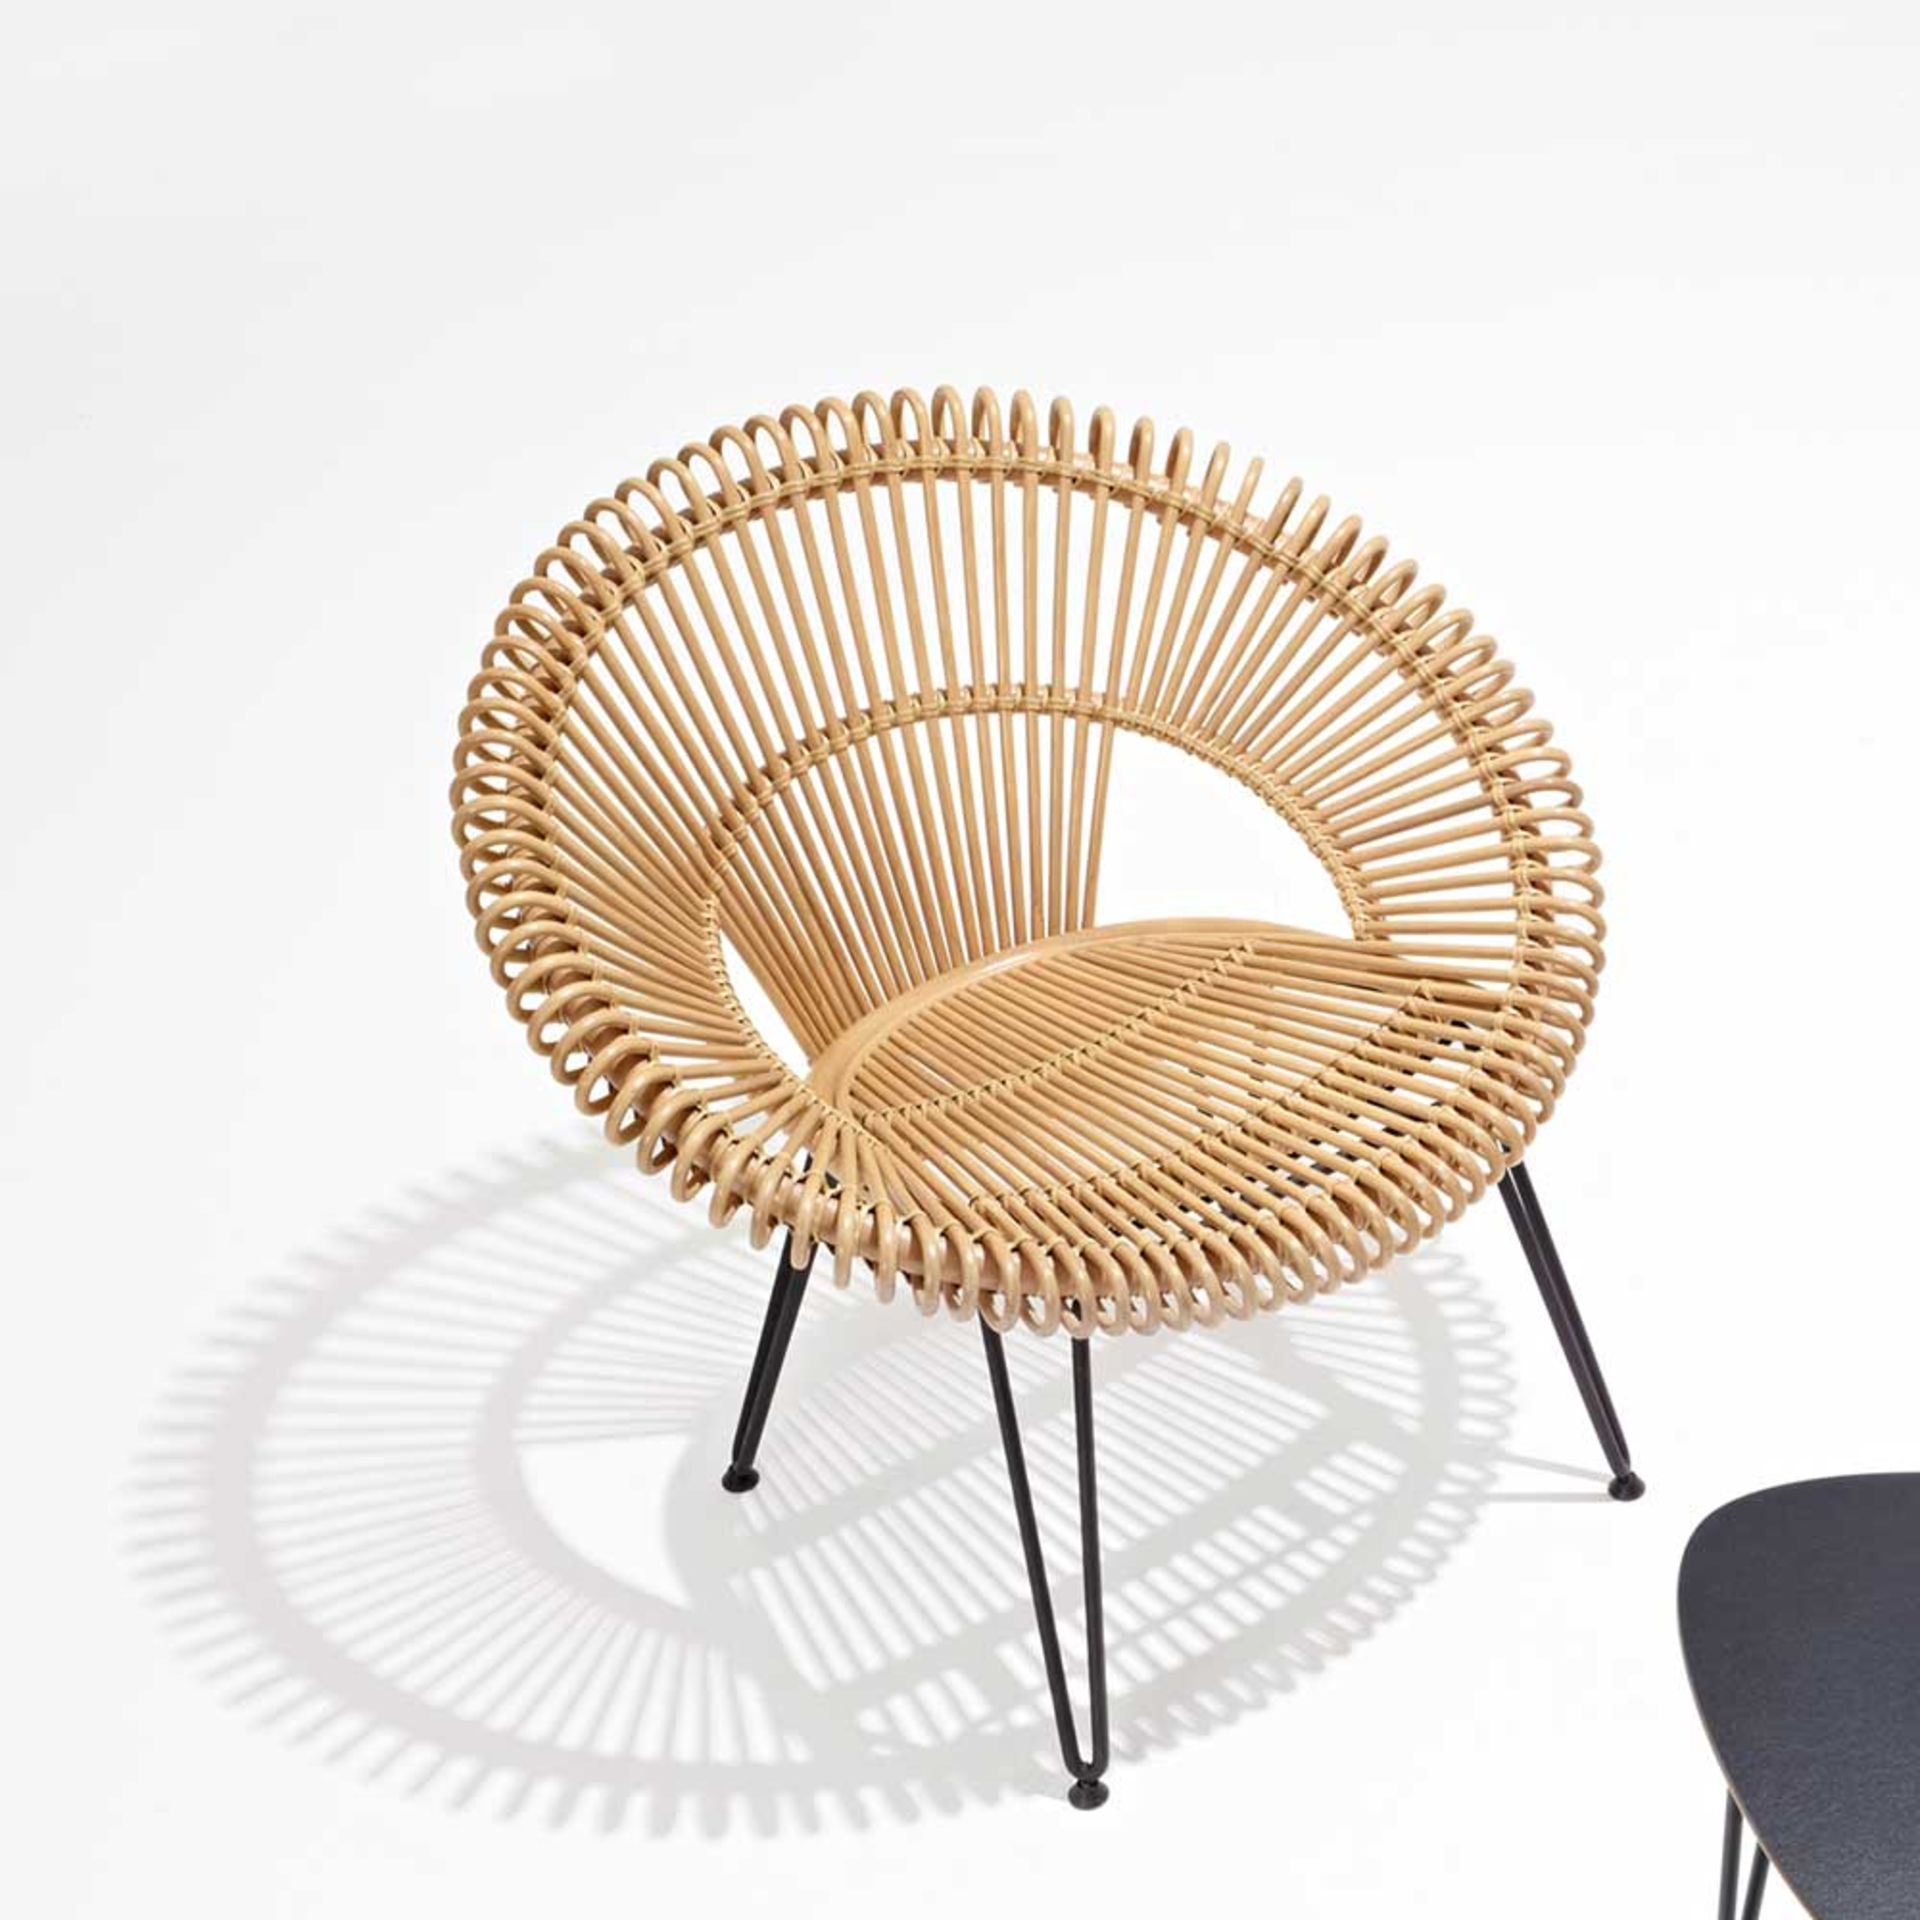 1 x Cruz Lazy Chair By Vincent Shepherd - Natural Rattan - For Contemporary Interiors - RRP £375! - Image 2 of 4